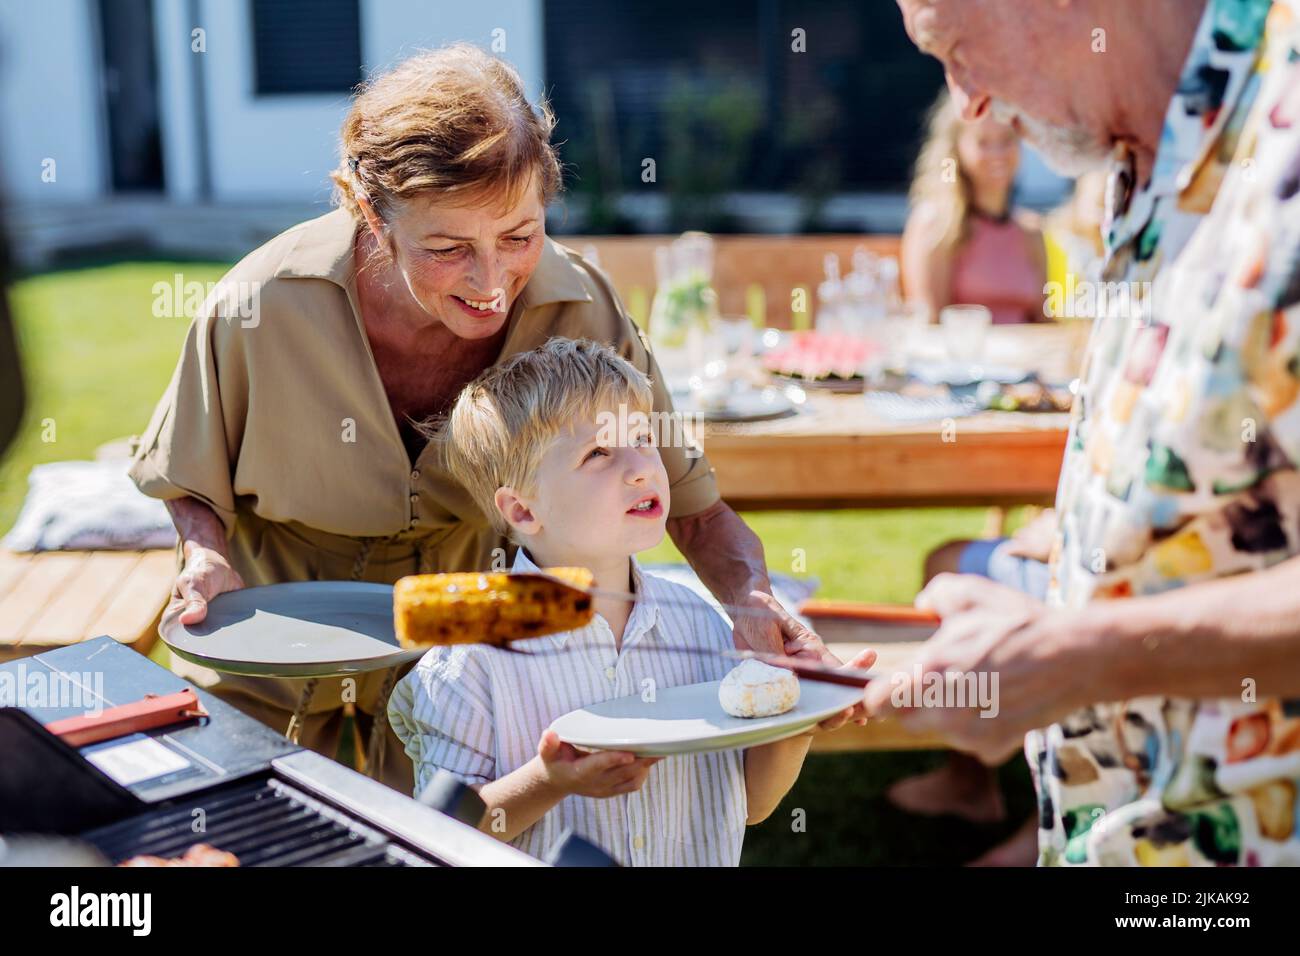 Grandparents giving grilled cheese and corn their grandson at garden grill party. Stock Photo